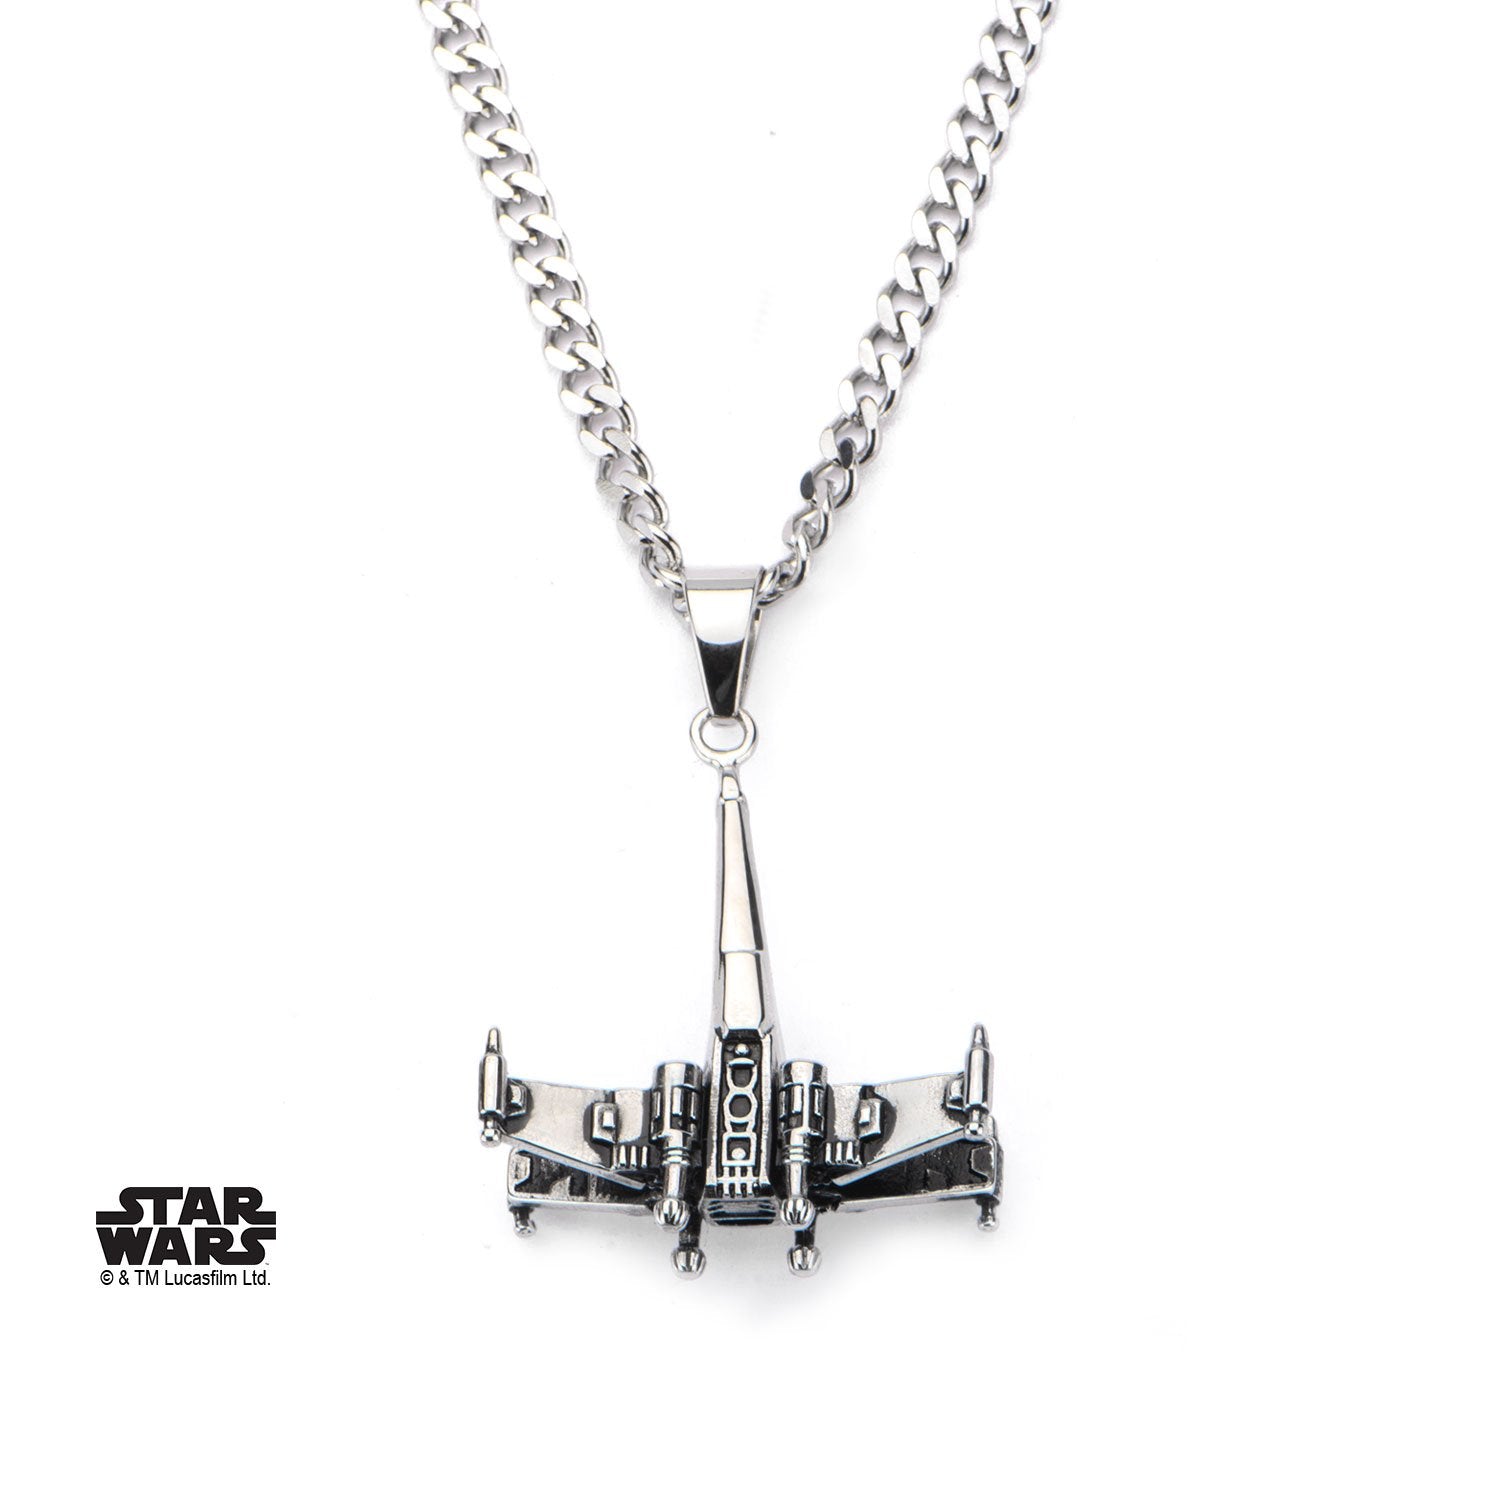 Star Wars 3D X-Wing Starfighter comes with a Chain